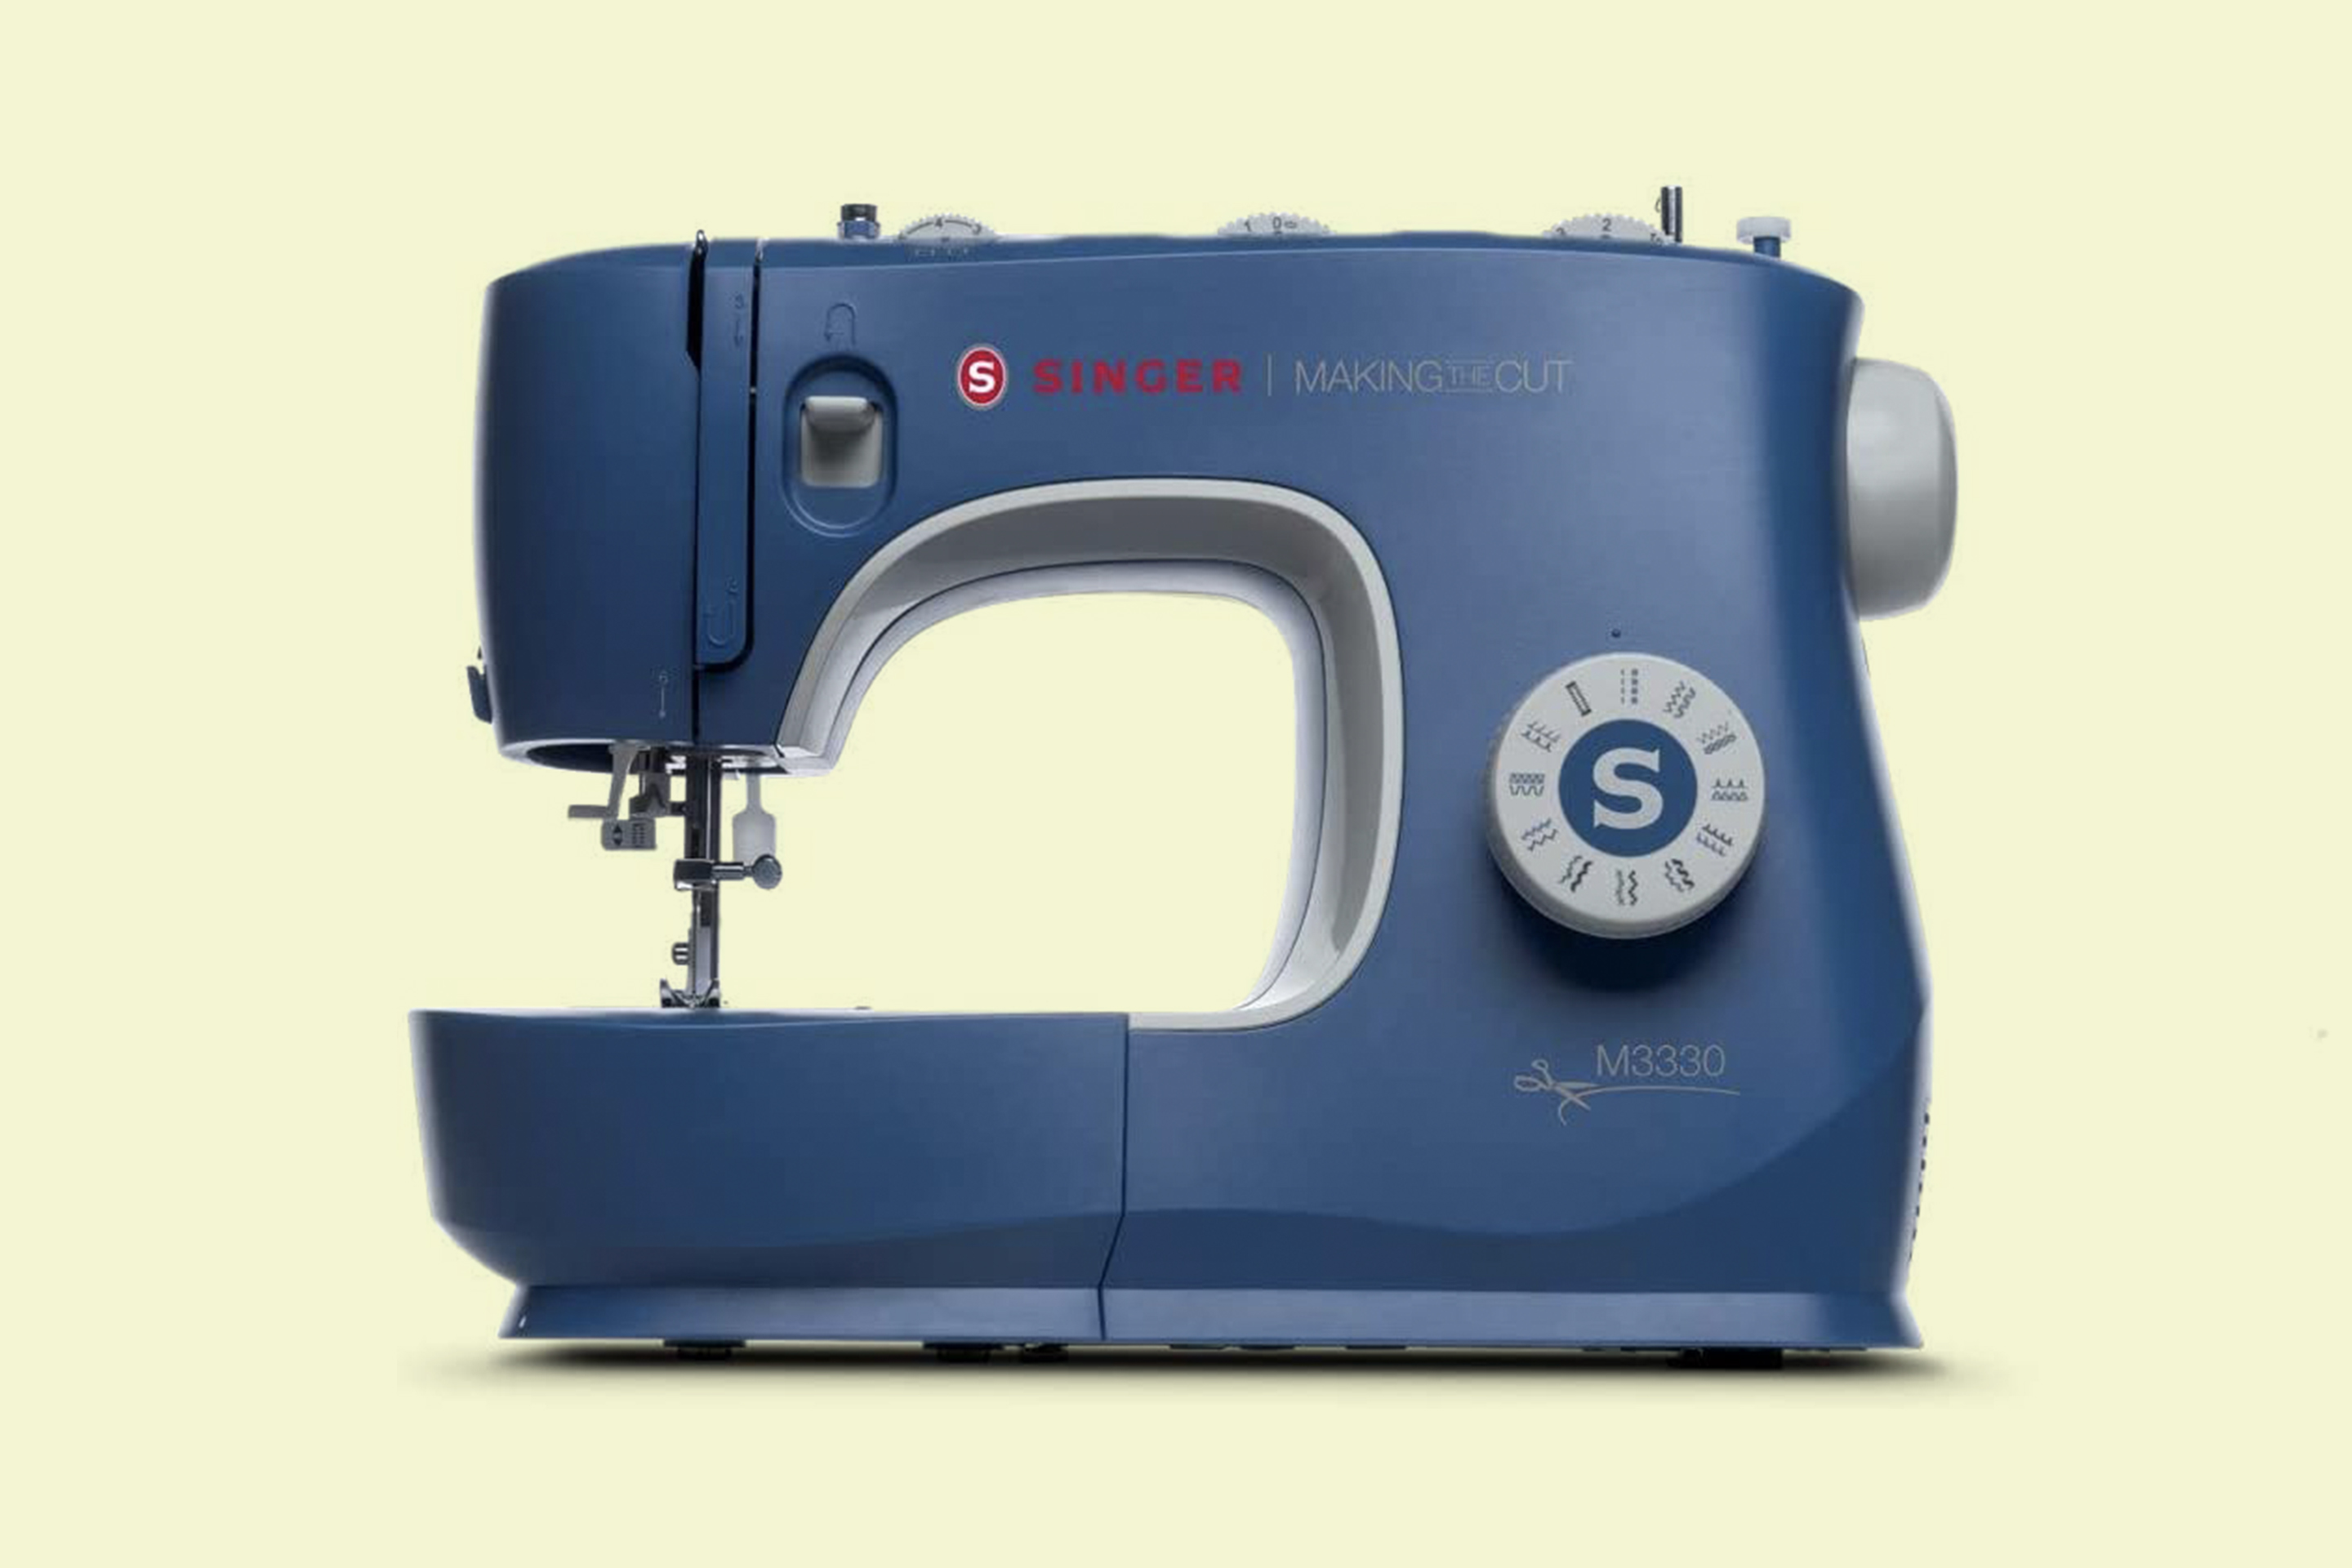 The Best Toy Sewing Machine? Sew Cool Sewing Machine